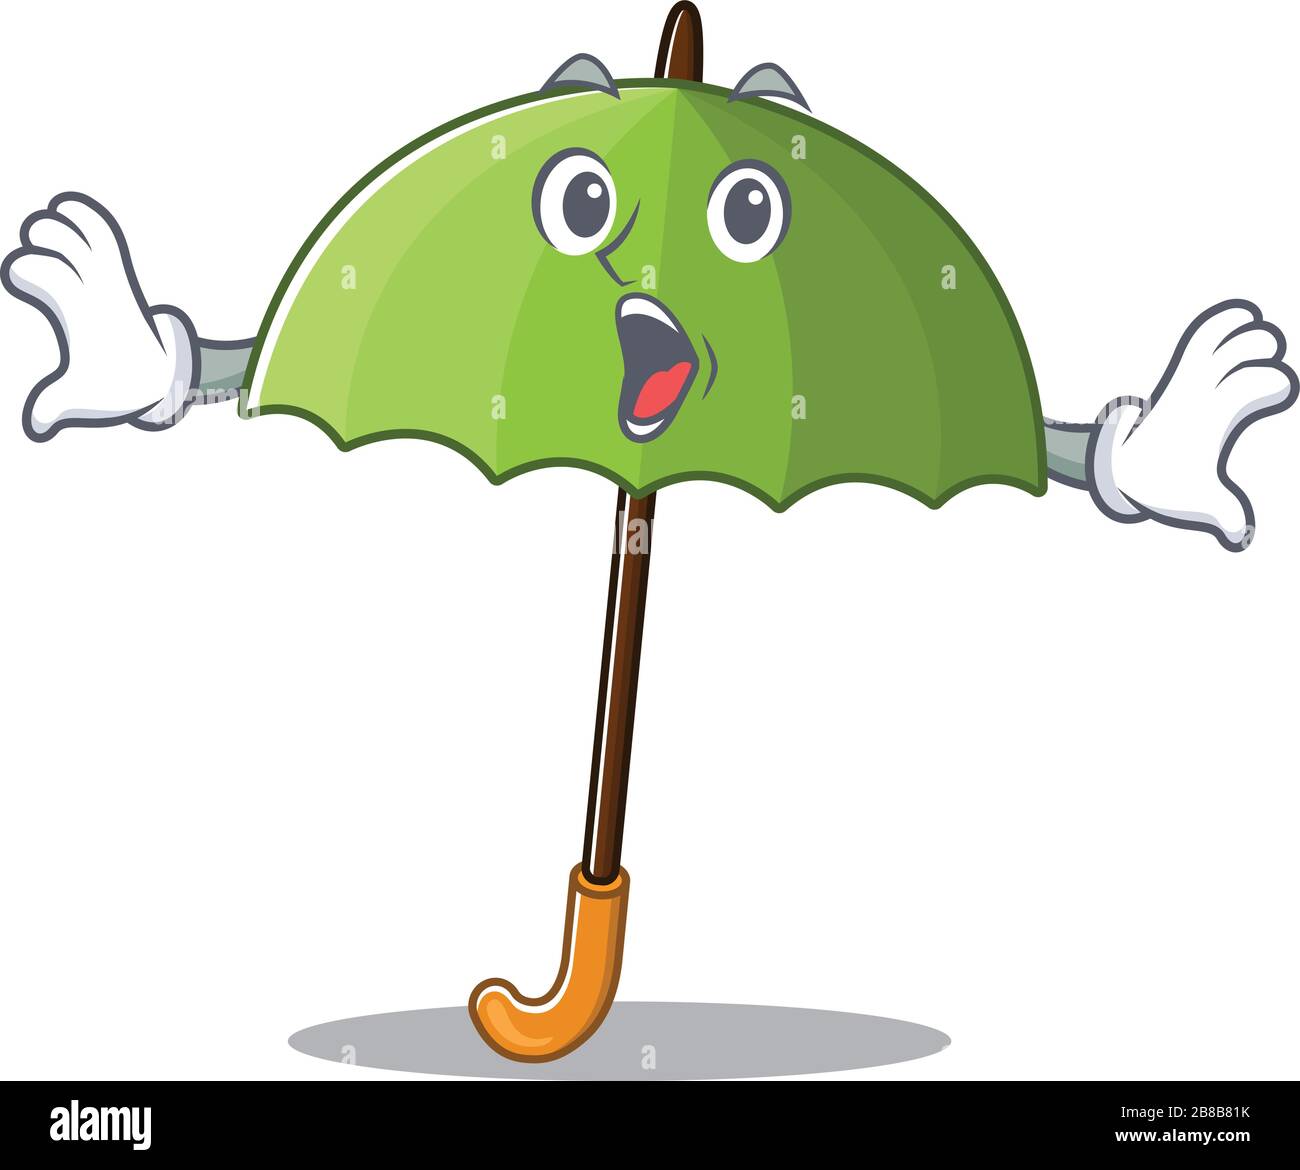 A cartoon character of green umbrella making a surprised gesture Stock Vector